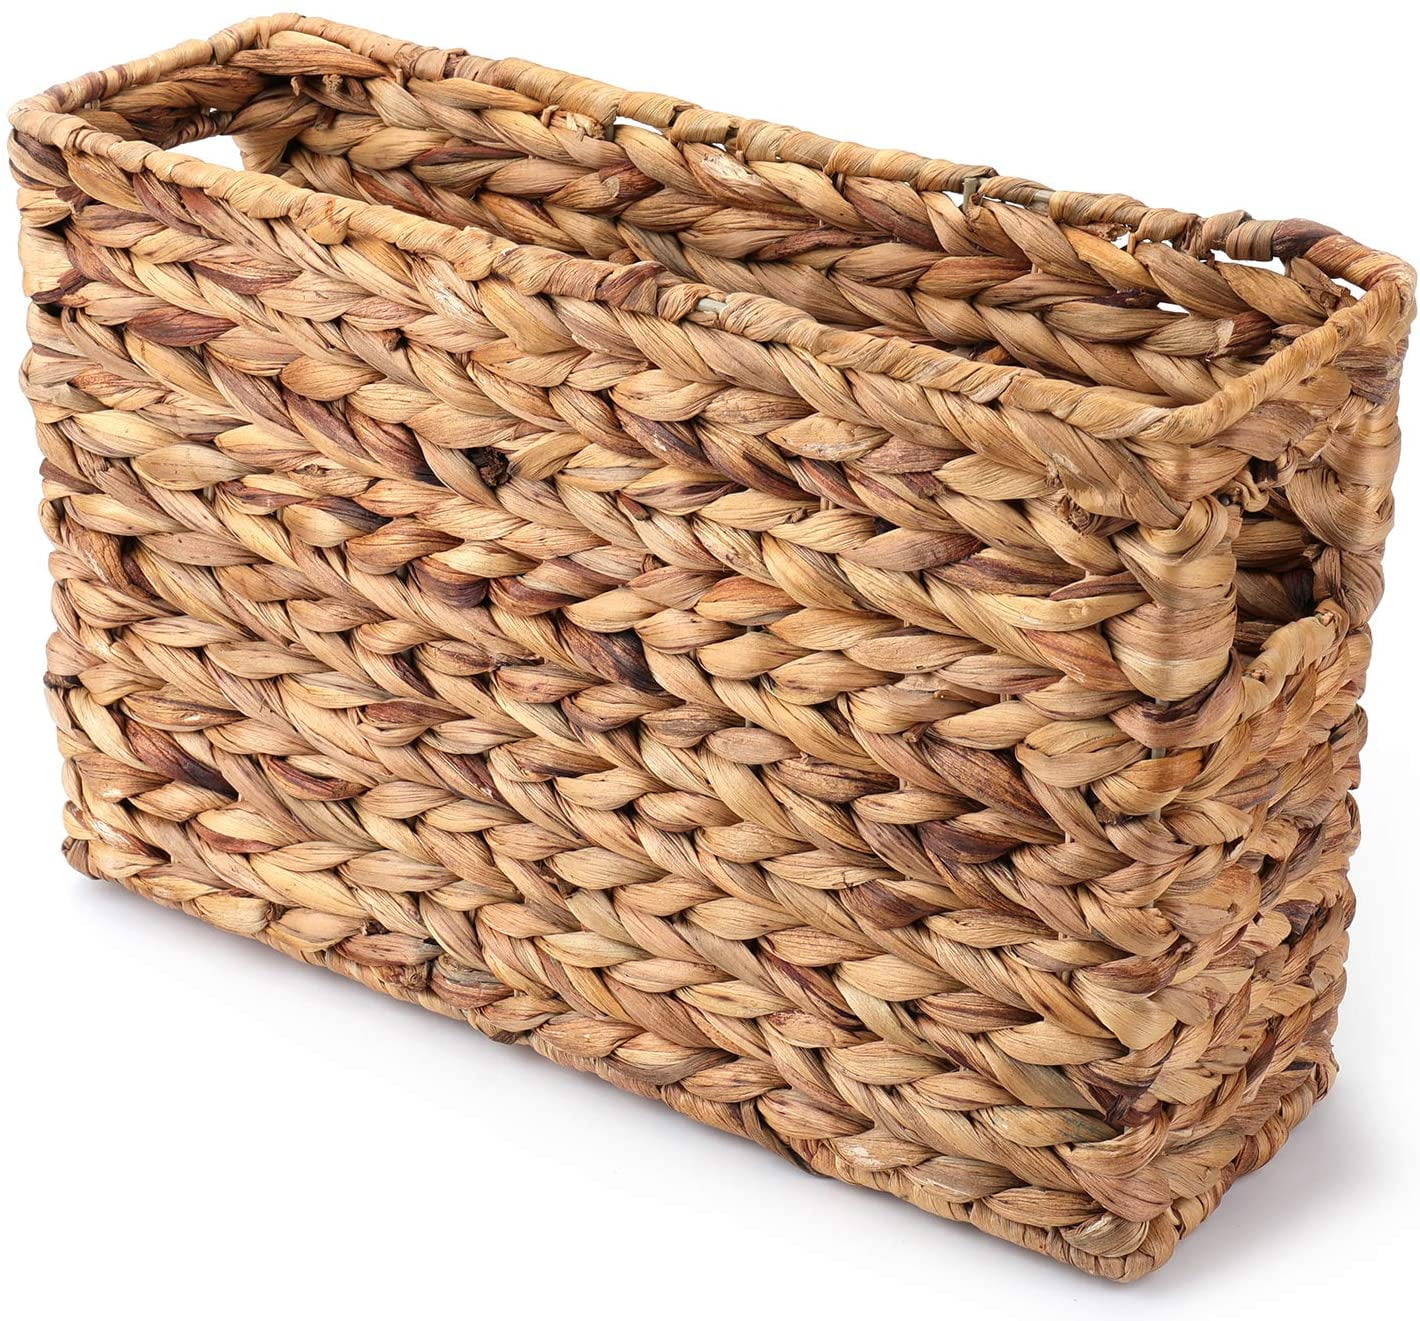 Small BASIC HOUSE Water Hyacinth Wicker Storage Collection Display Hamper Basket 